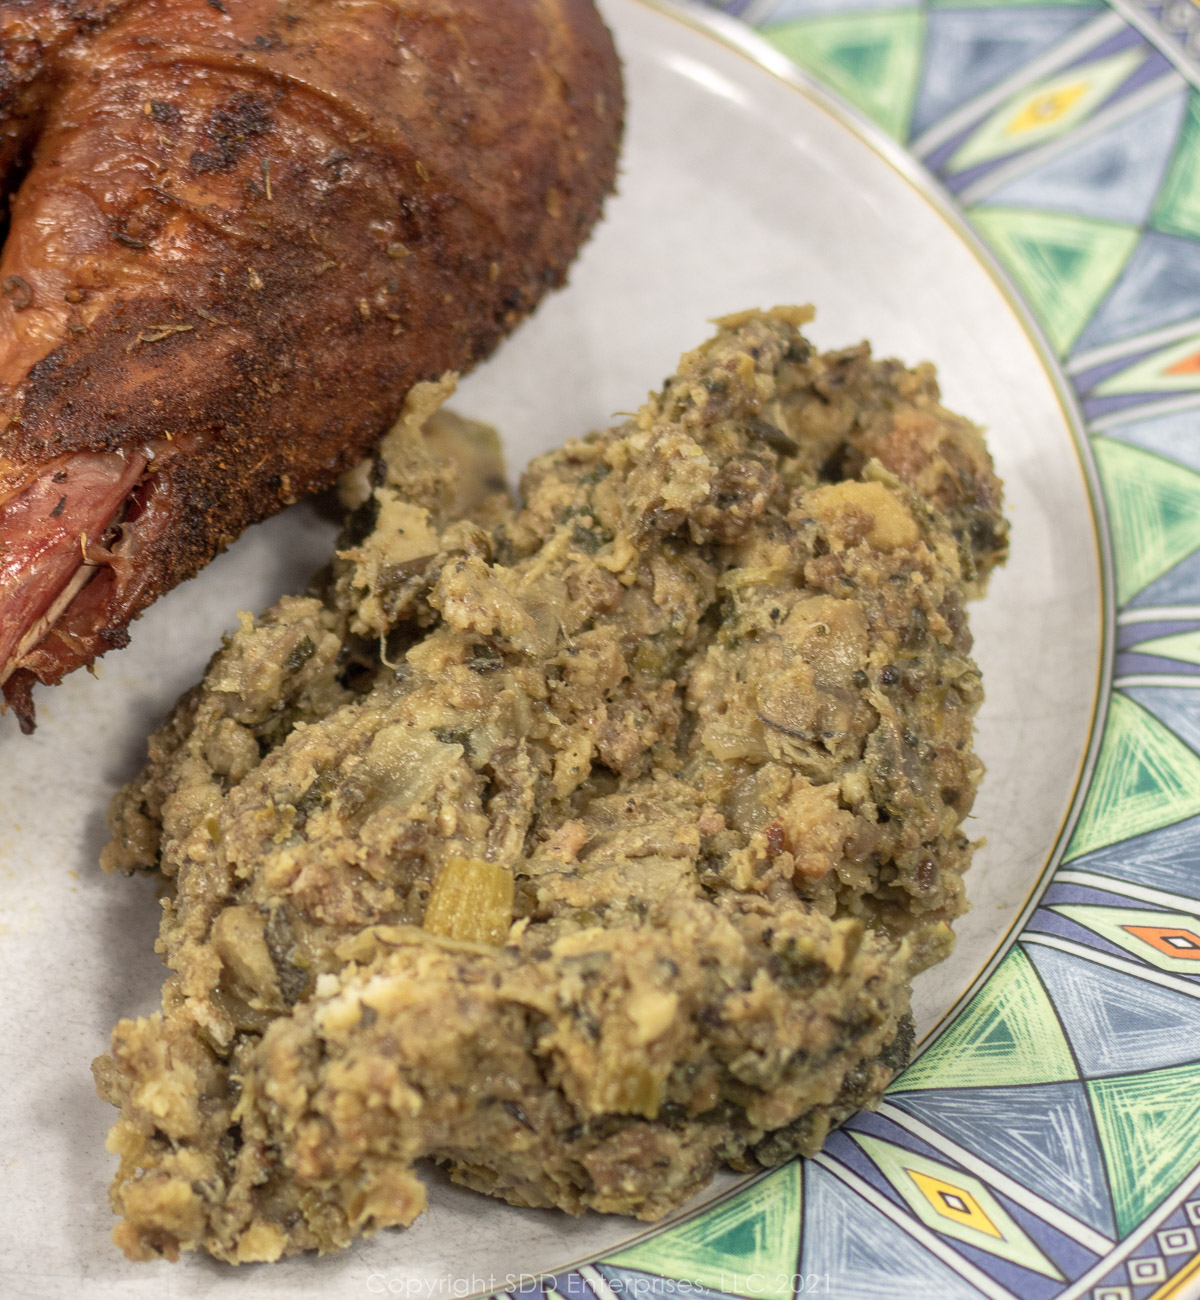 New Orleans oyster dressing on a white and green plate with a turkey leg